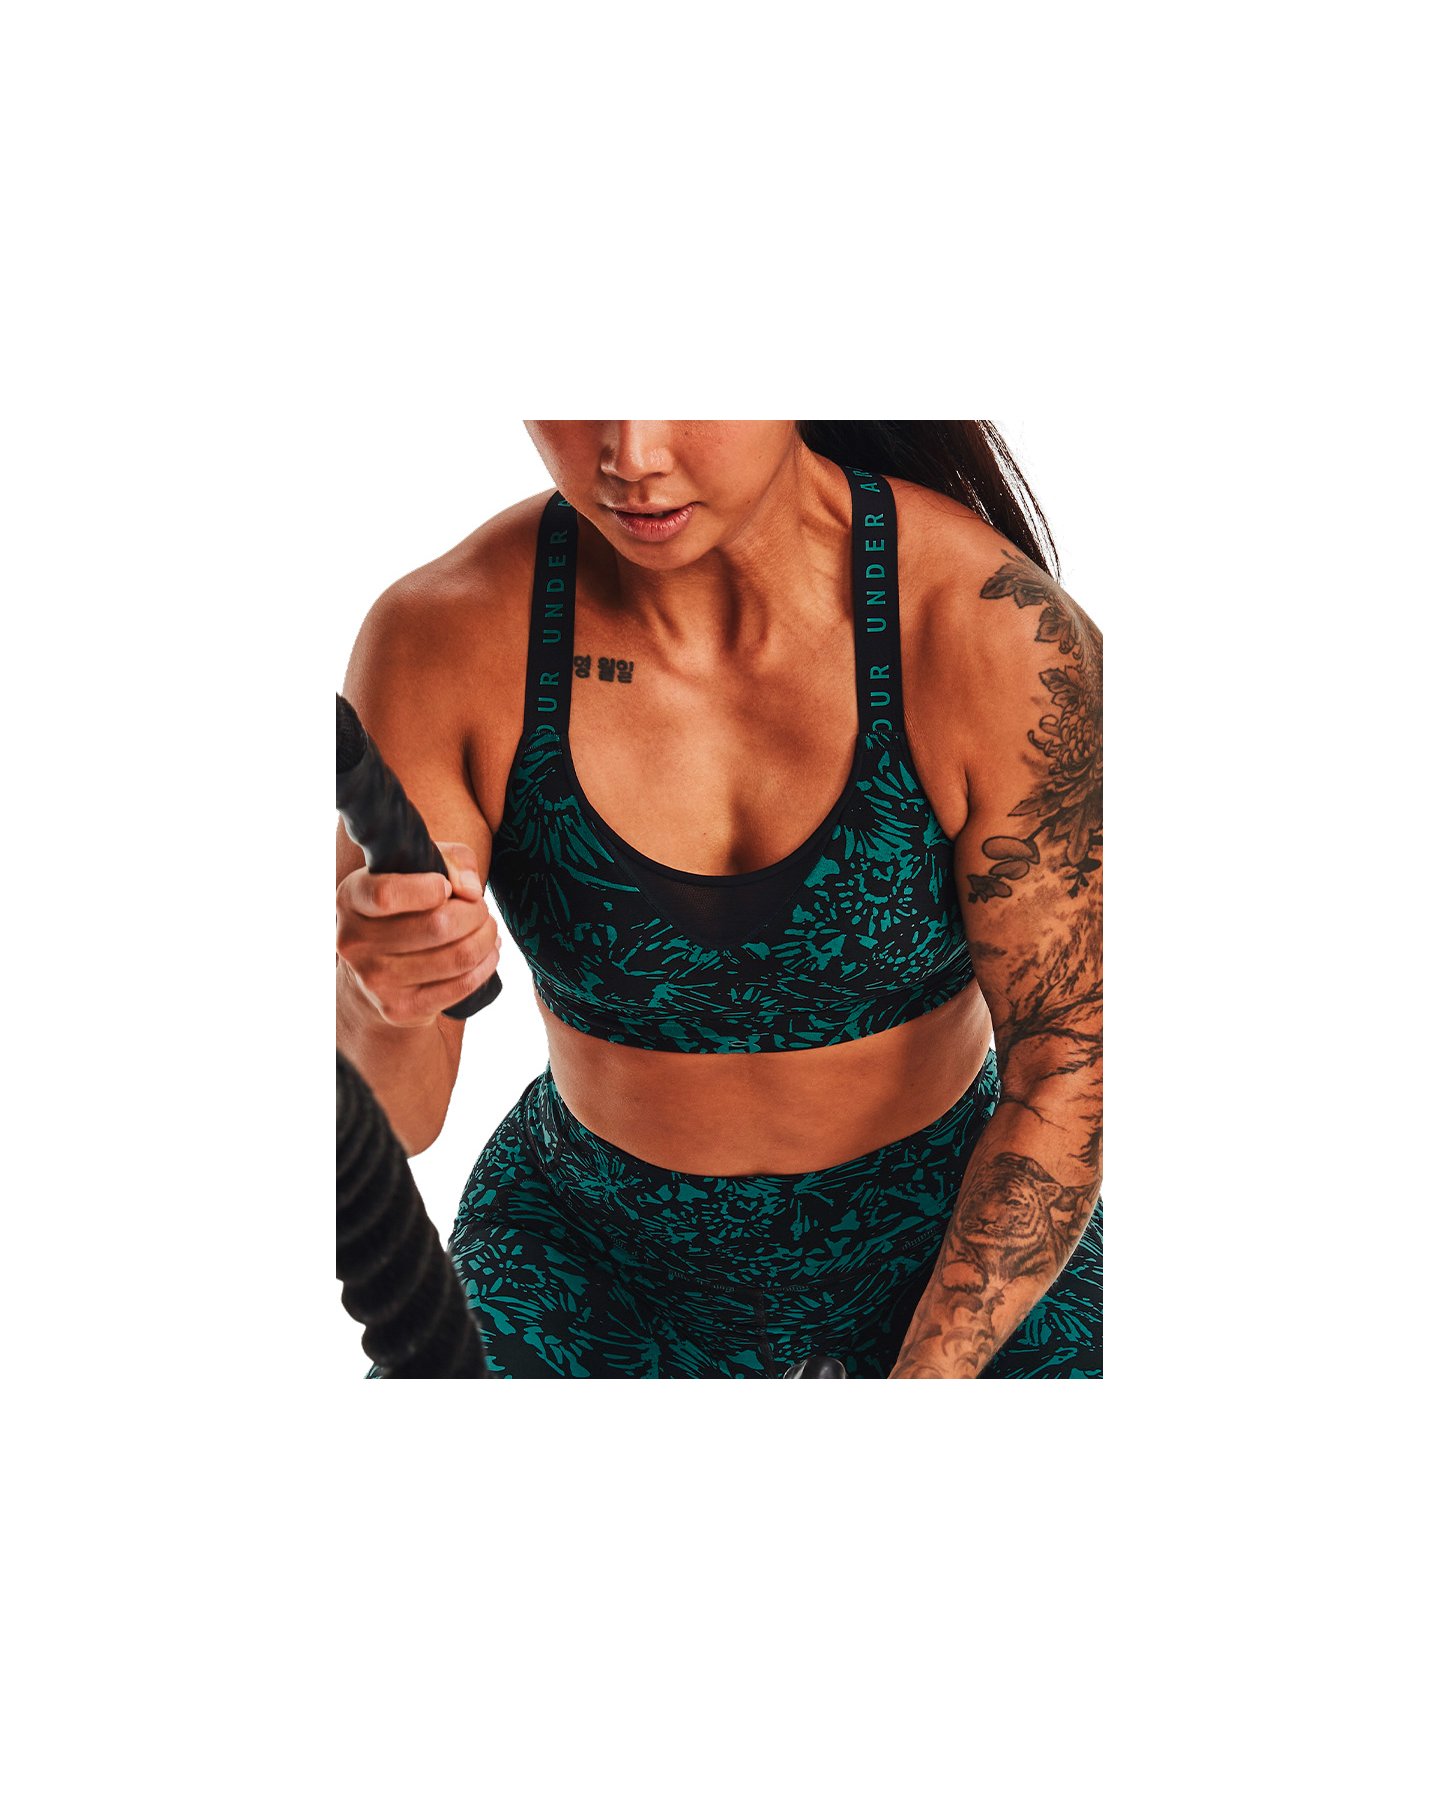 High support bra large size woman Under Armour Infinity - Bras, socks and  underwear - Women's textiles - Running